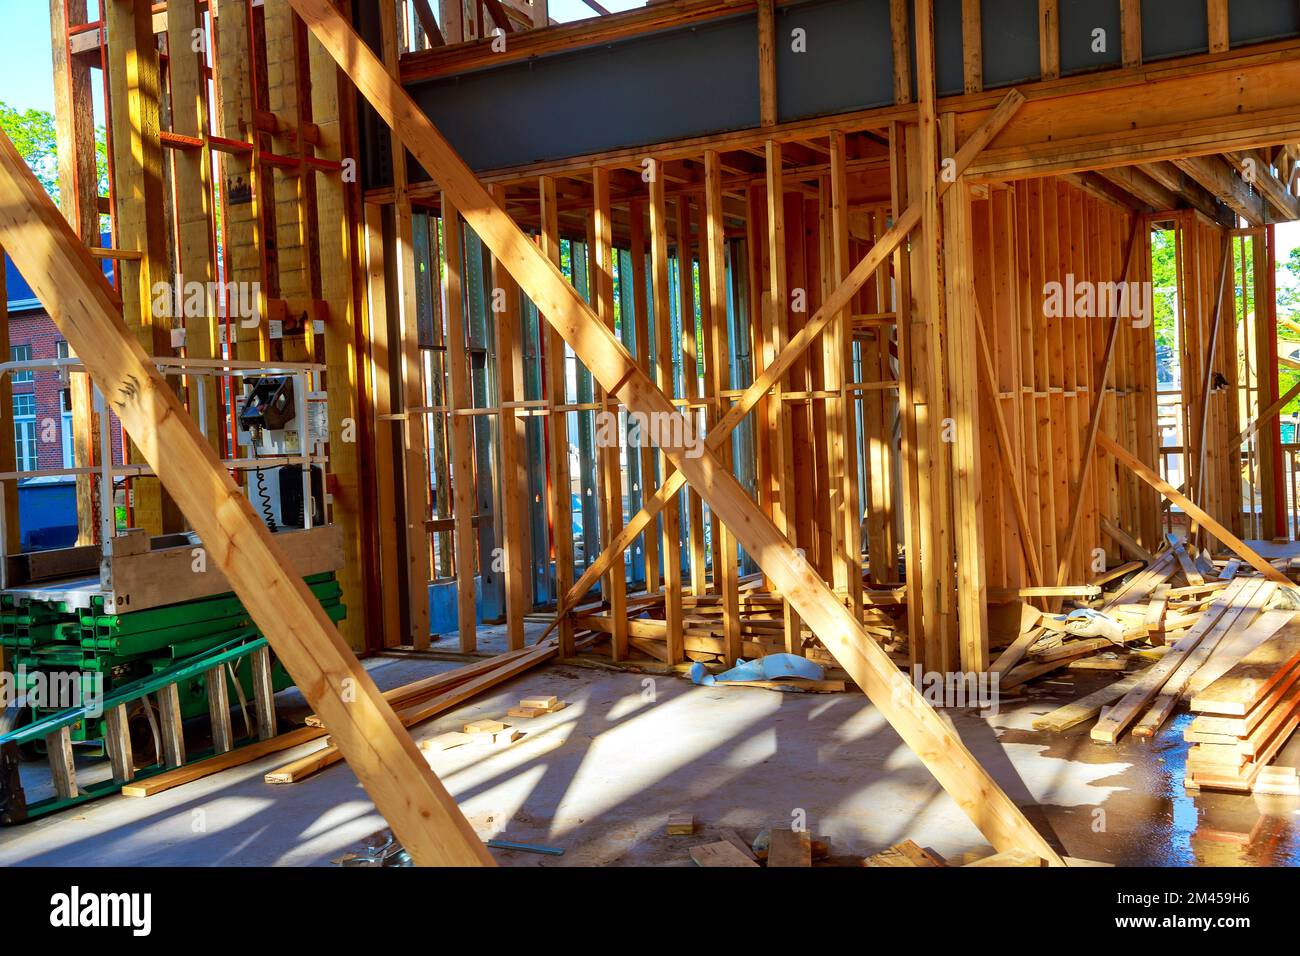 View the building construction wood framing beams of a new house under construction Stock Photo